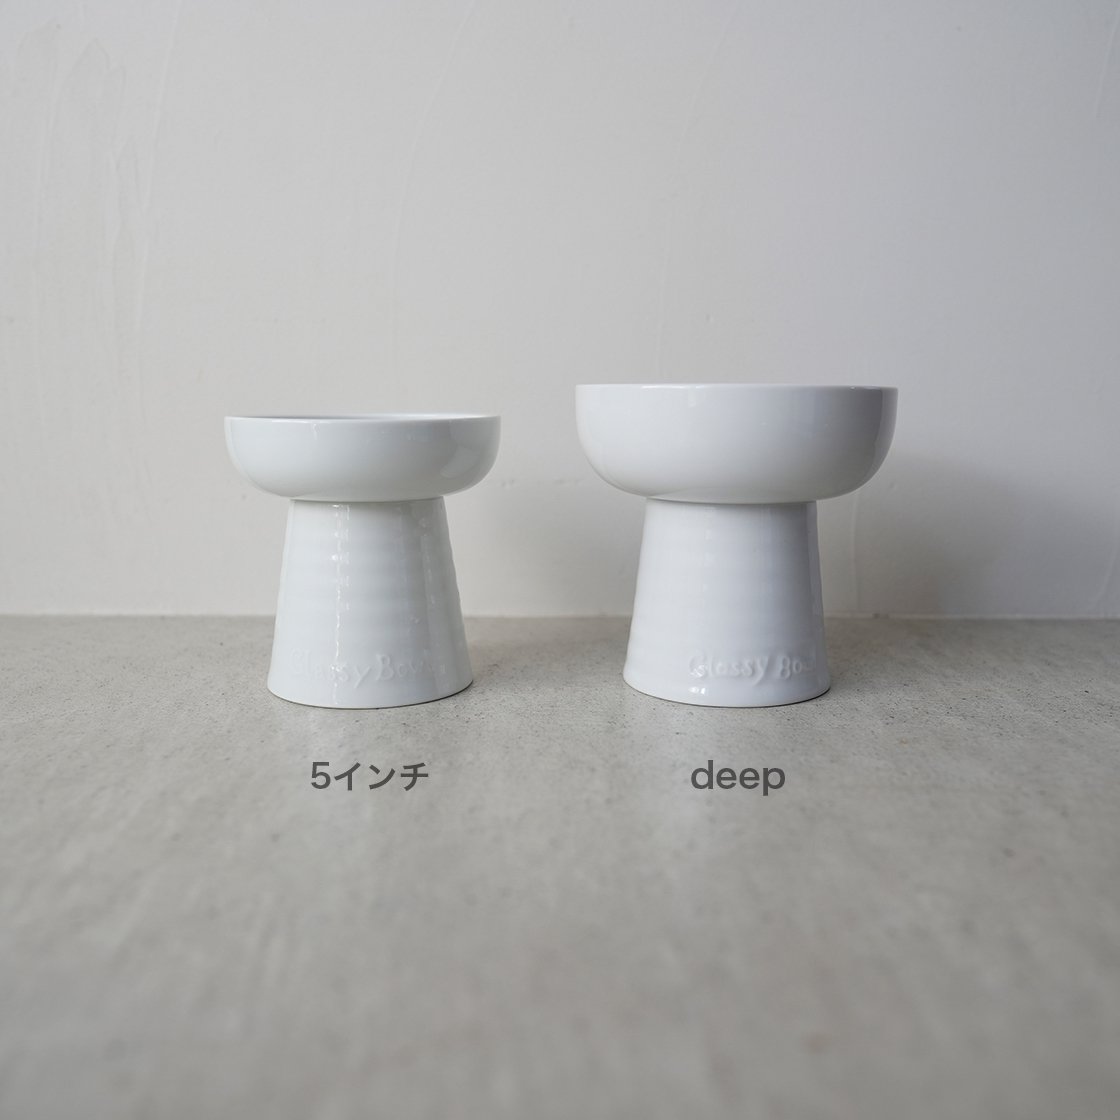 Classy Bowl【deep】for drinking water and for dog...